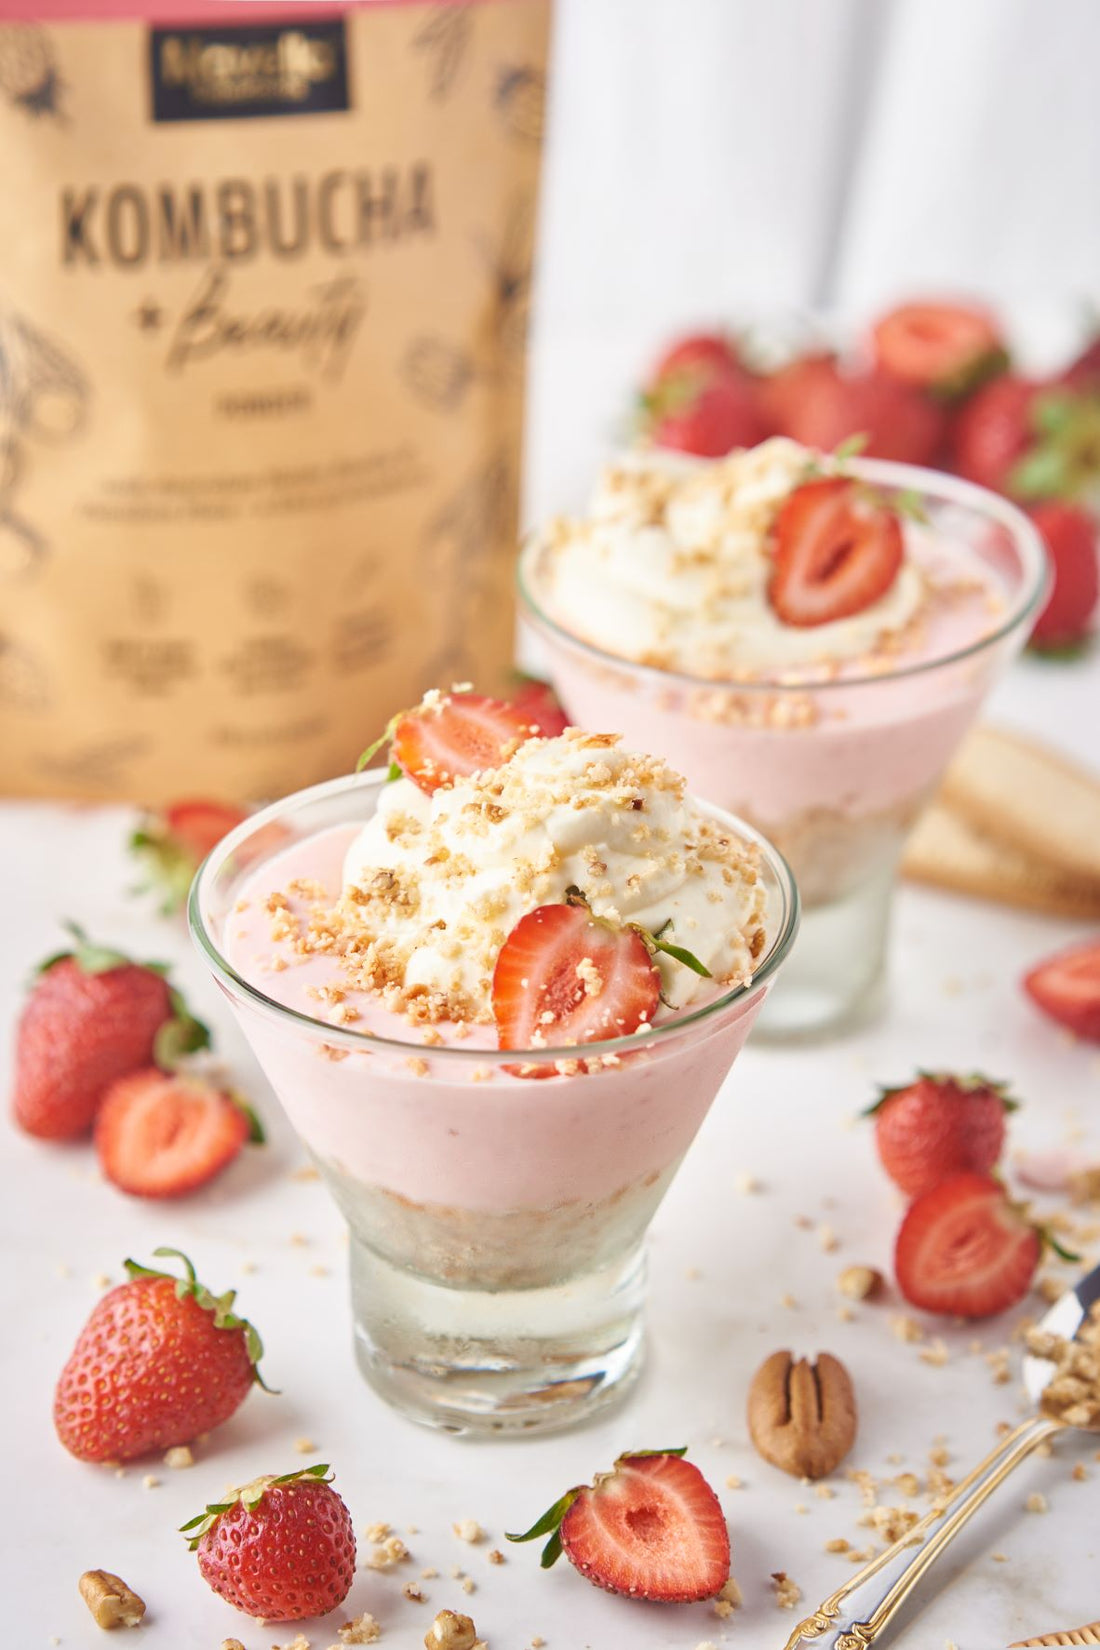 Strawberry Cheesecake Cups